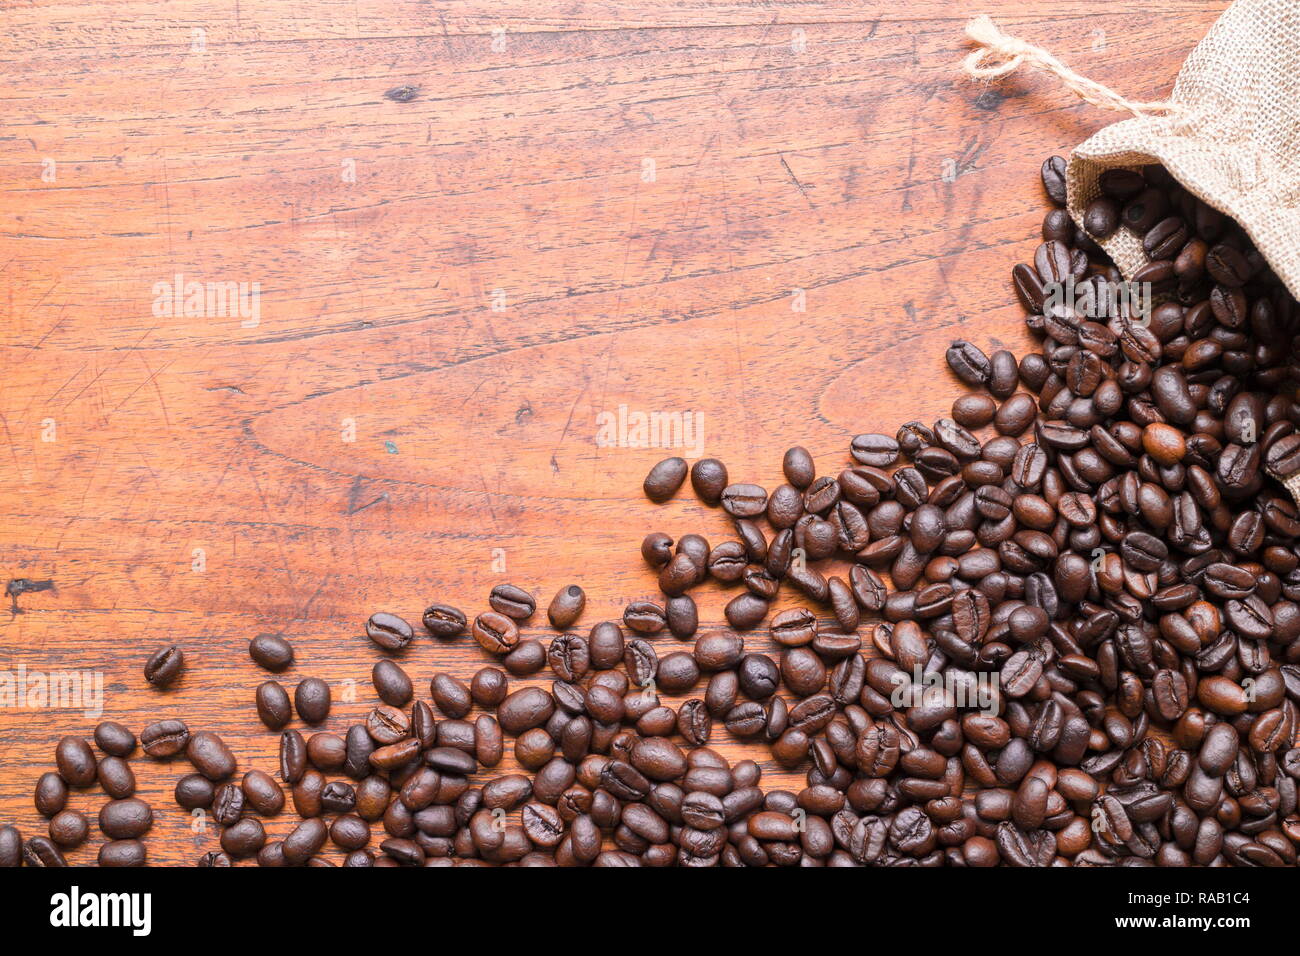 Coffee beans in sack and coffee beans on wooden table with copy space for text or image. Stock Photo